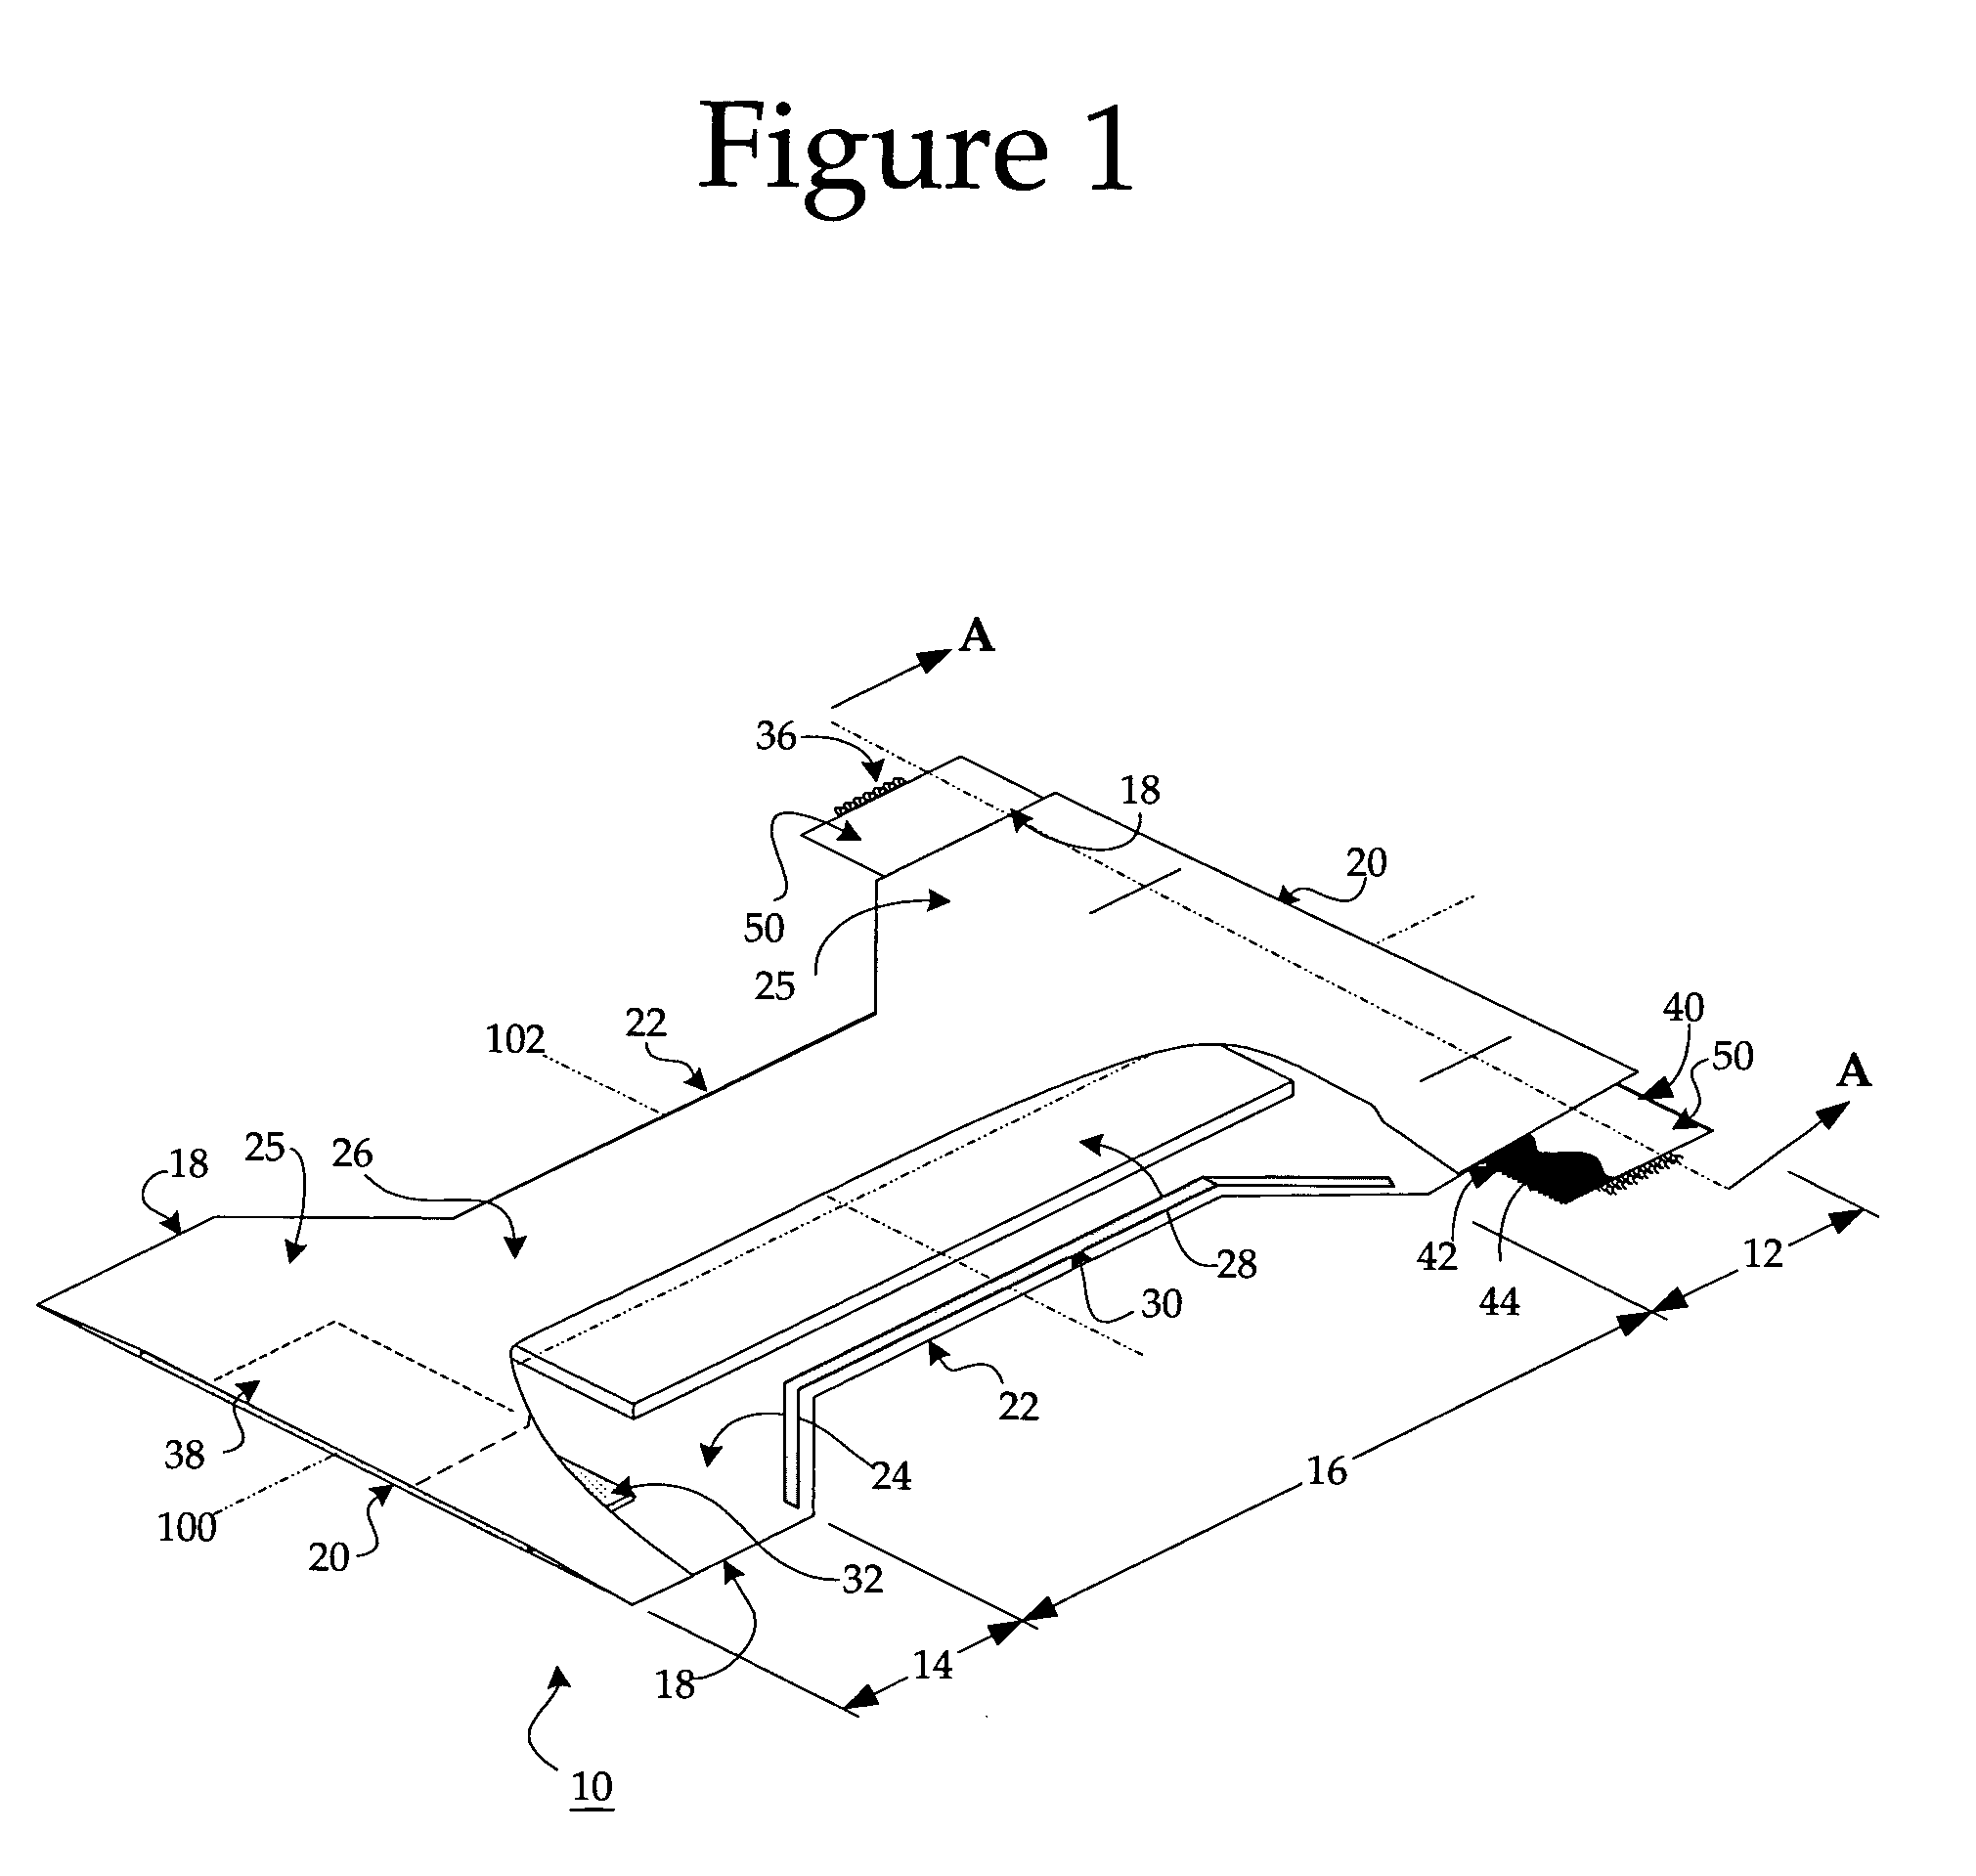 Performance index for absorbent articles having improved leakage performance